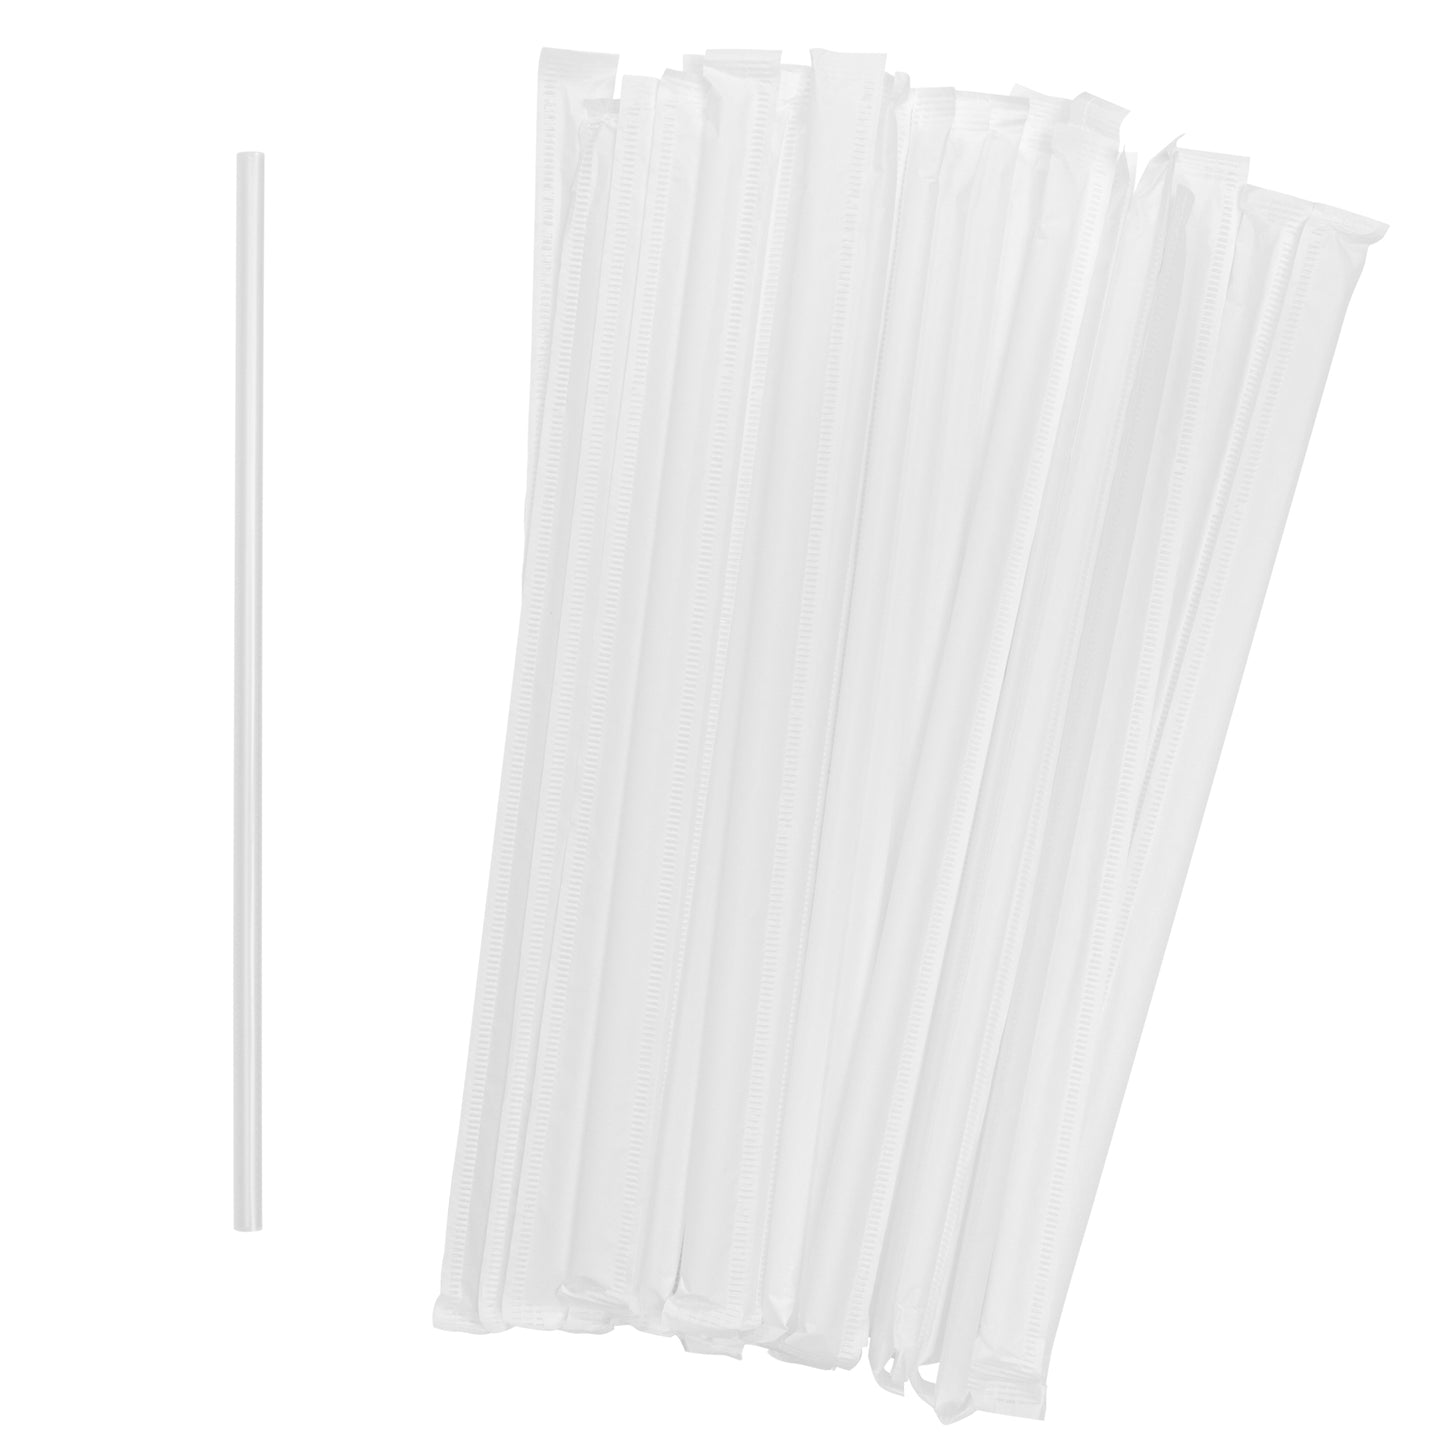 CIAO! 9" Clear Super Jumbo Straws .26" outside diameter(6.7mm) Paper Wrapped 9,000/case…